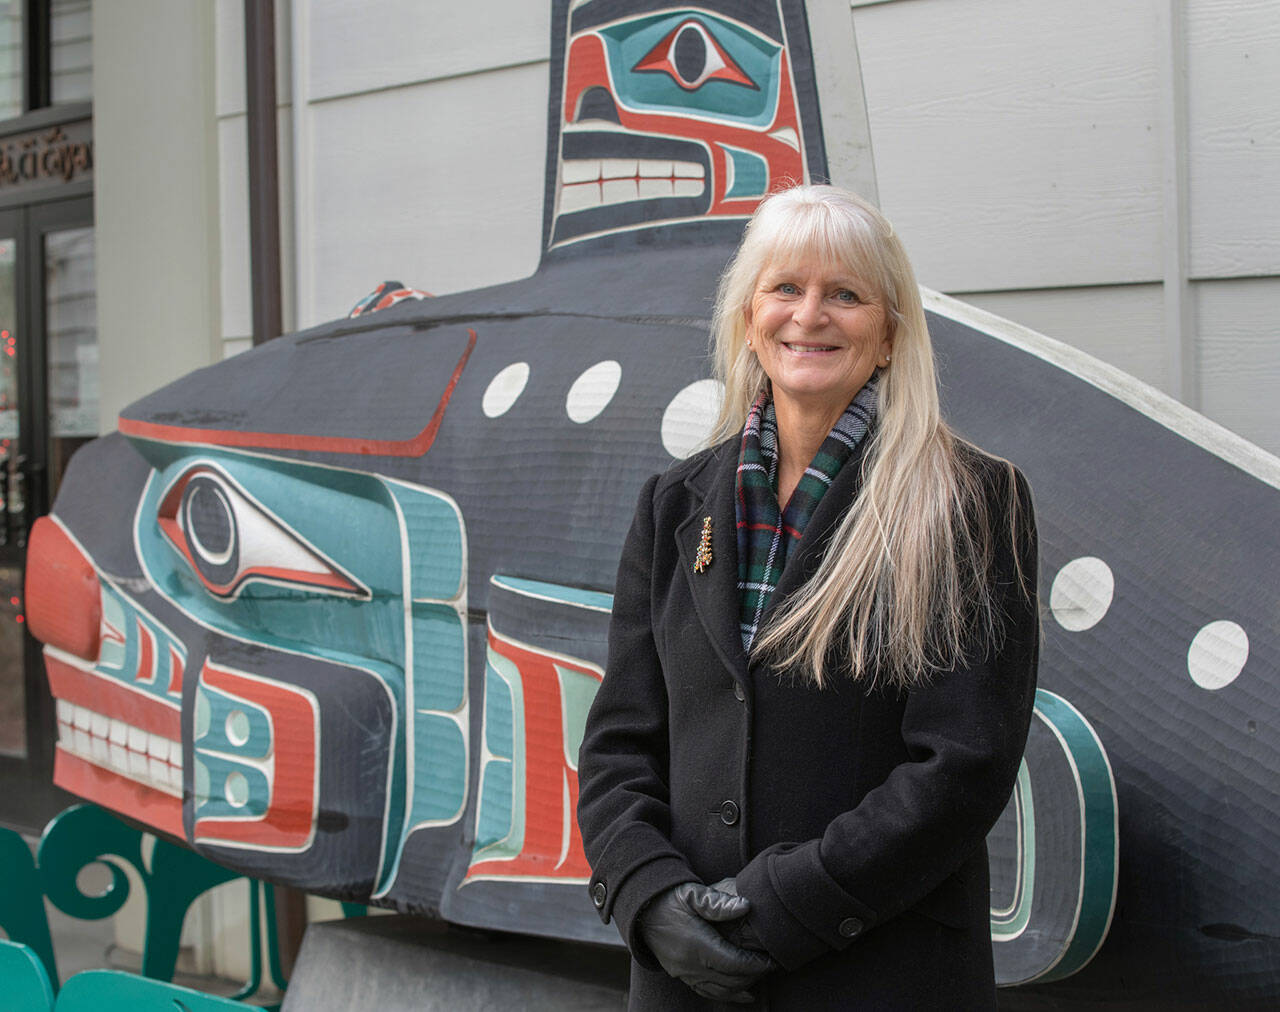 Sequim Gazette file photo by Emily Matthiessen
Annette Nesse, pictured here at the Jamestown S’Klallam Tribe’s main campus in Blyn in December 2021, is serving as interim director at the Dungeness River Nature Center, the organization announced last week.